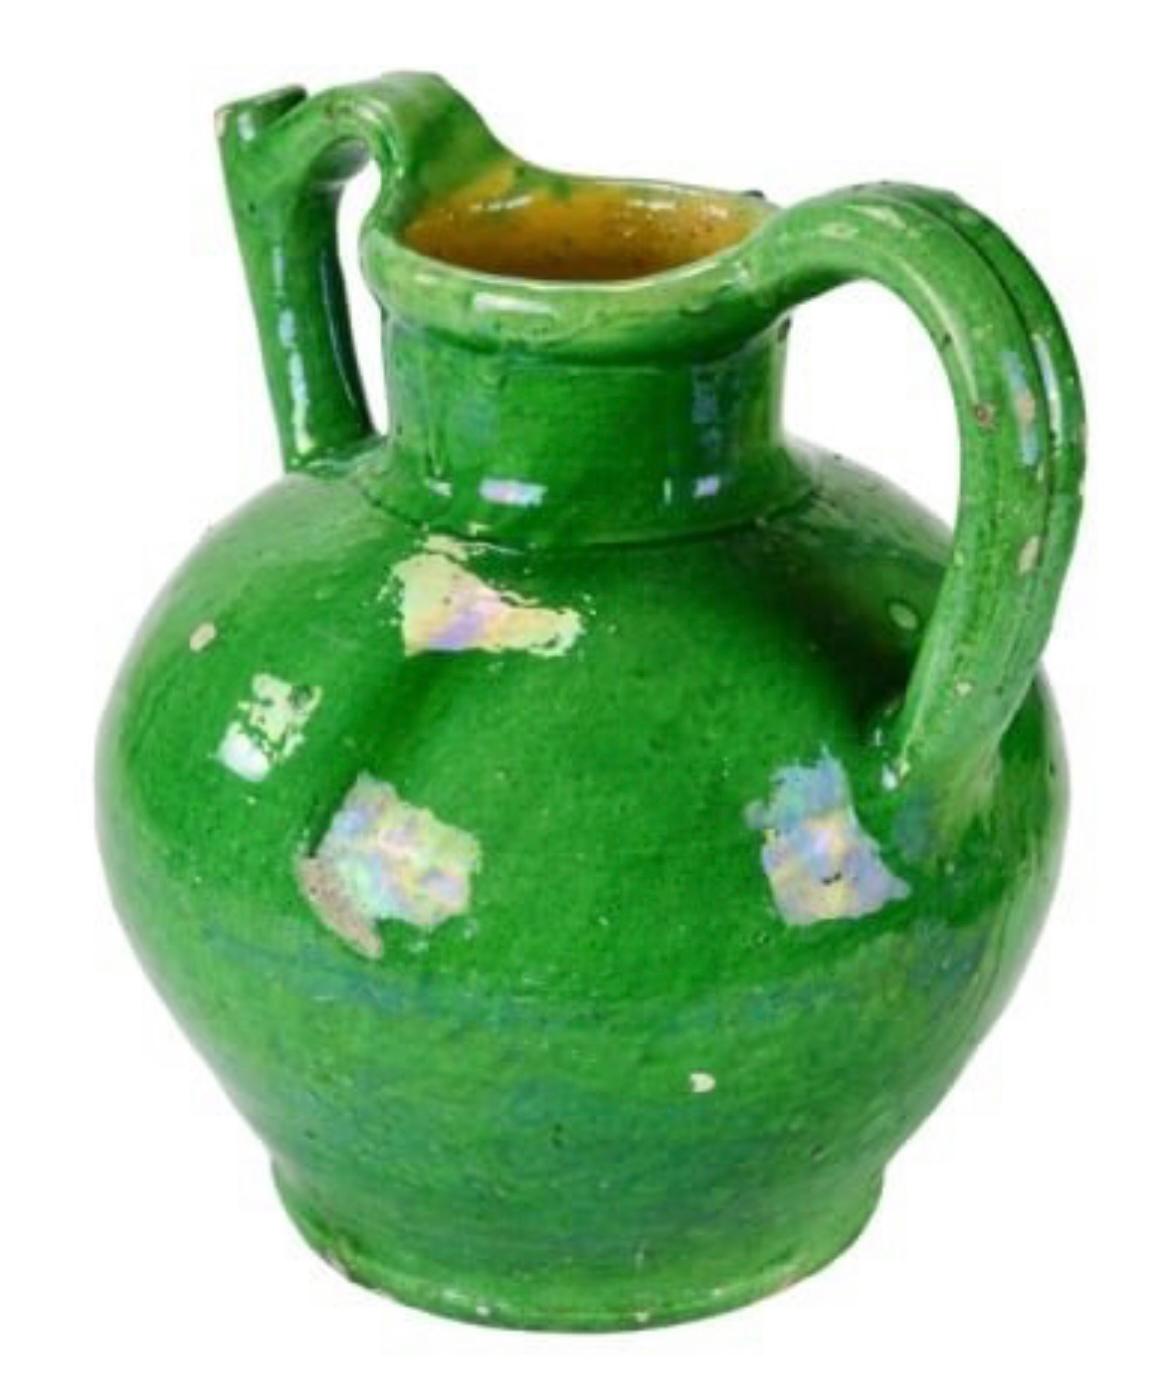 A French Provencale 2-handled pitcher in green glaze, late 19th century. 